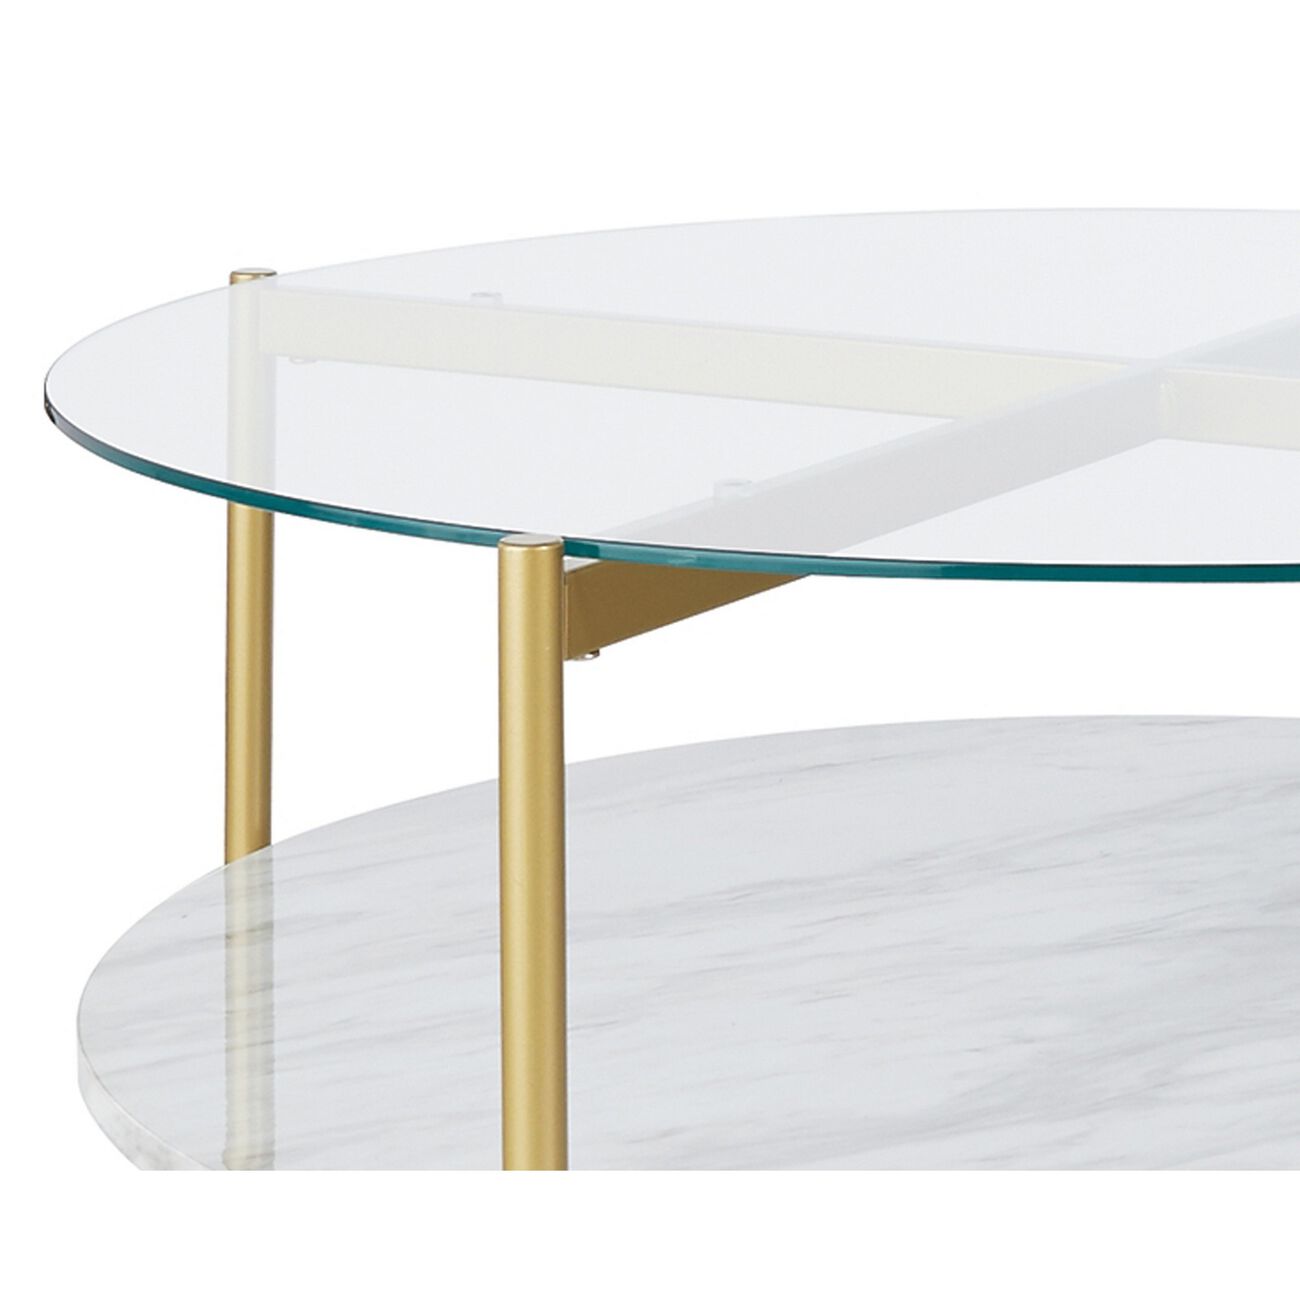 Glass Top Cocktail Table with Faux Marble Bottom Shelf, Clear and Gold